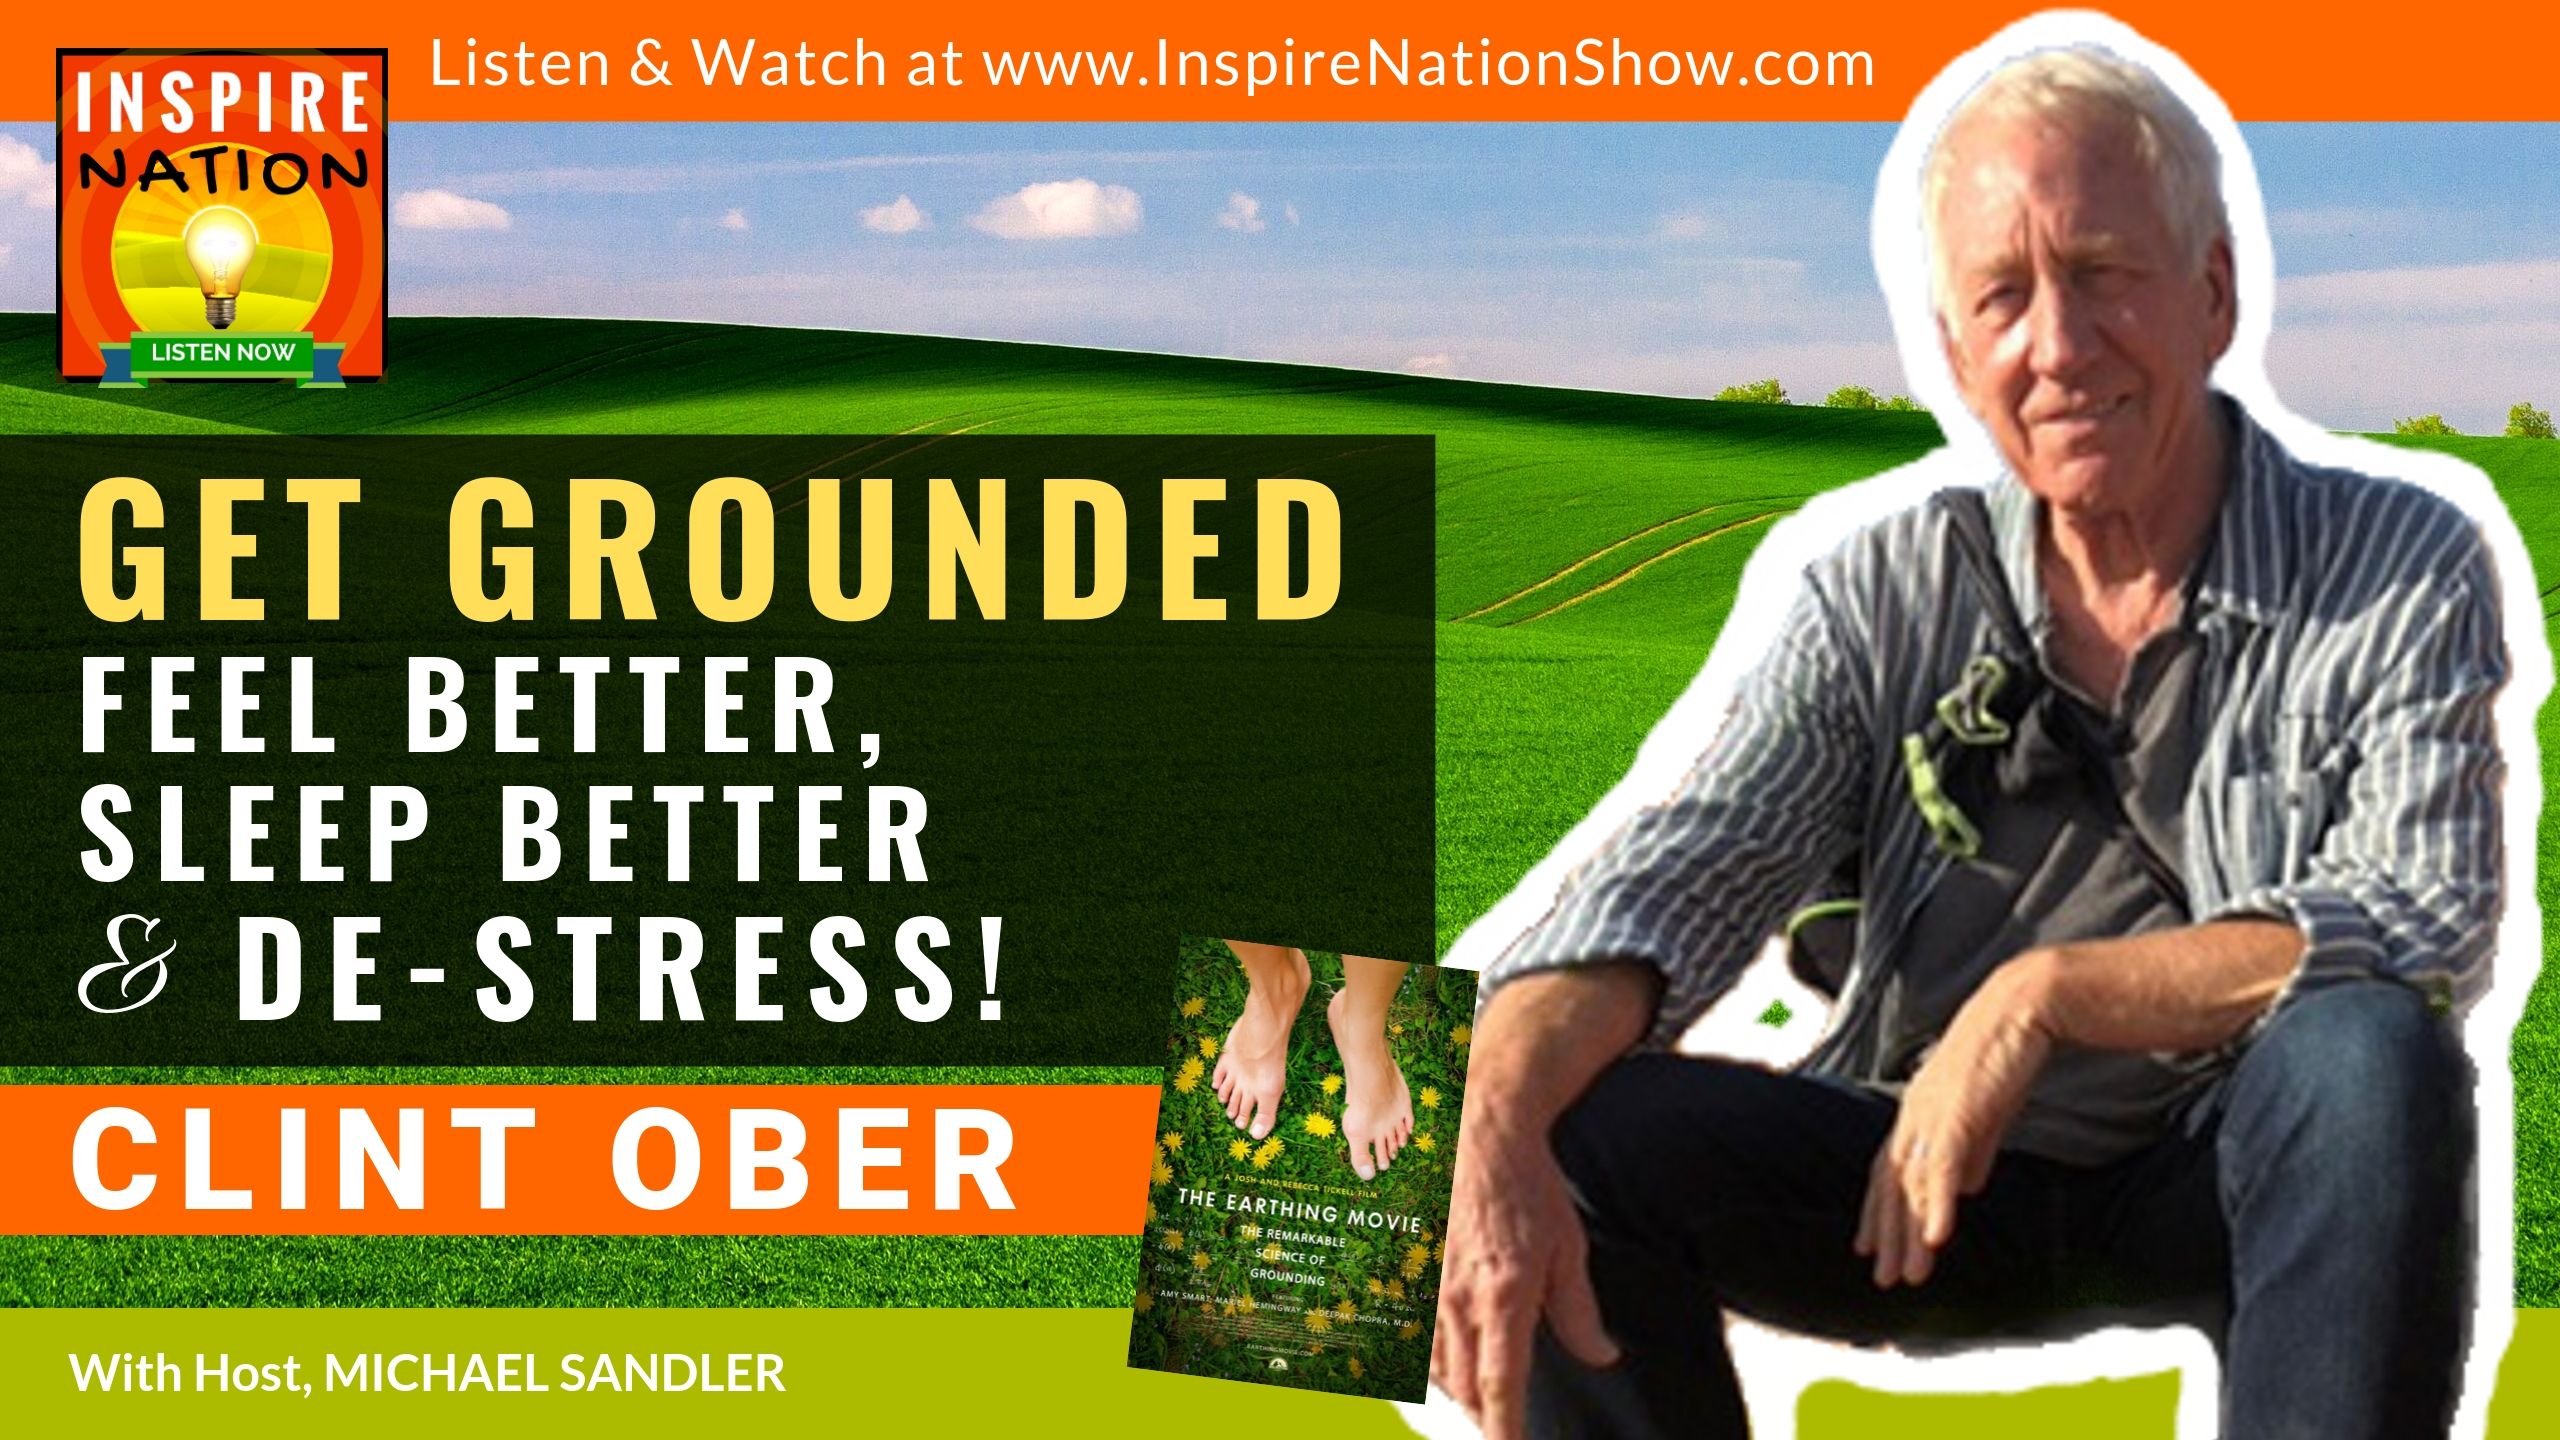 Michael Sandler interviews Clint Ober on the miraculous health benefits of grounding therapy, aka earthing.